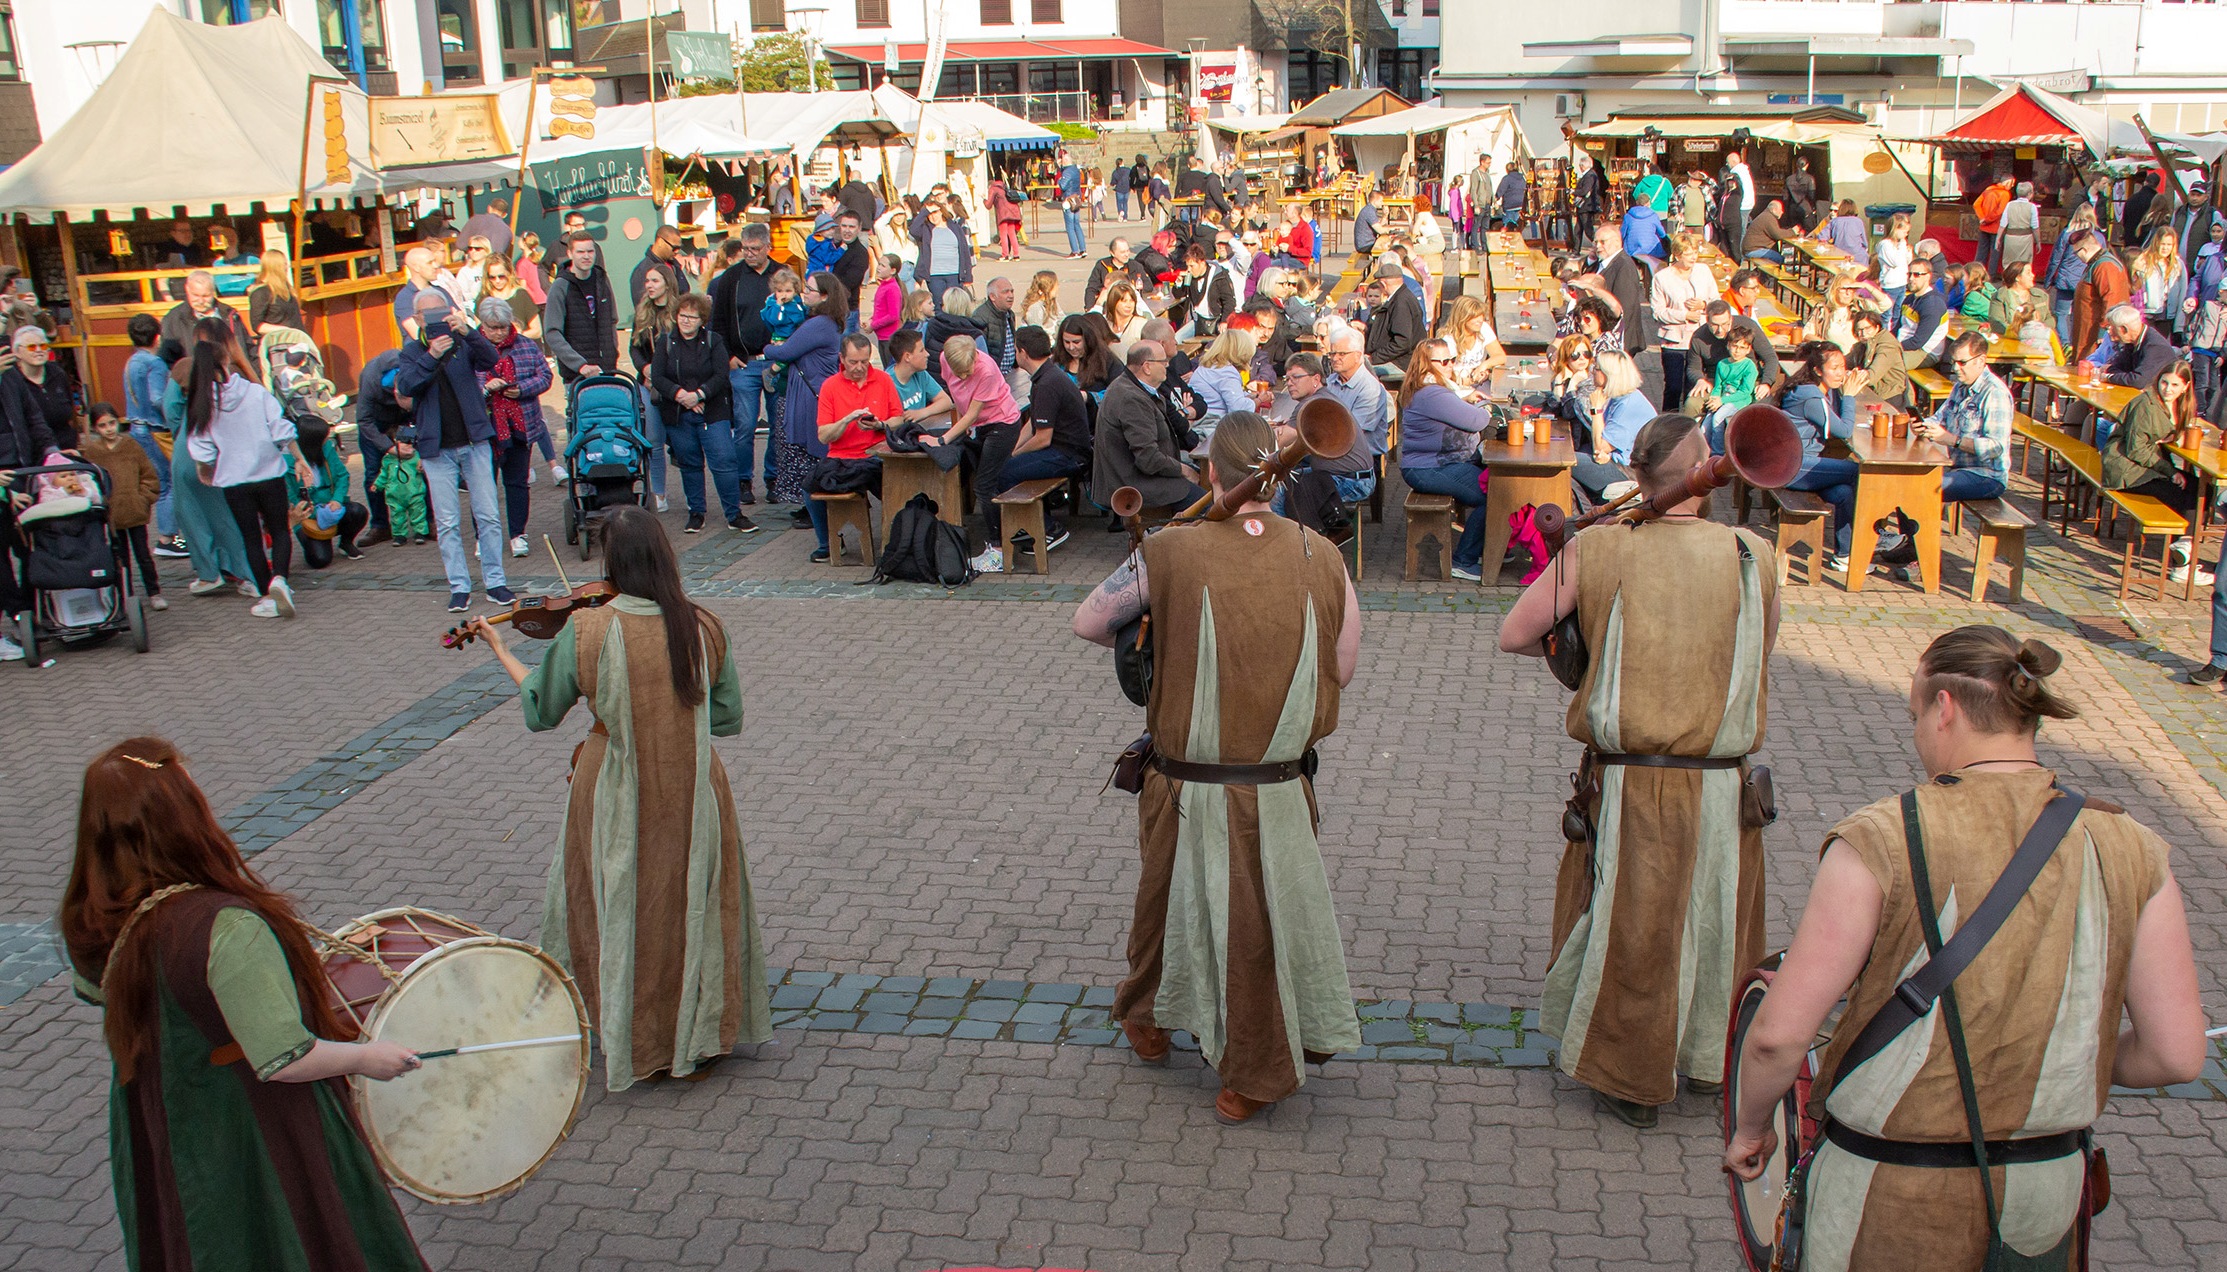 Medieval Band performing at the Medieval Spectacle in Ramstein